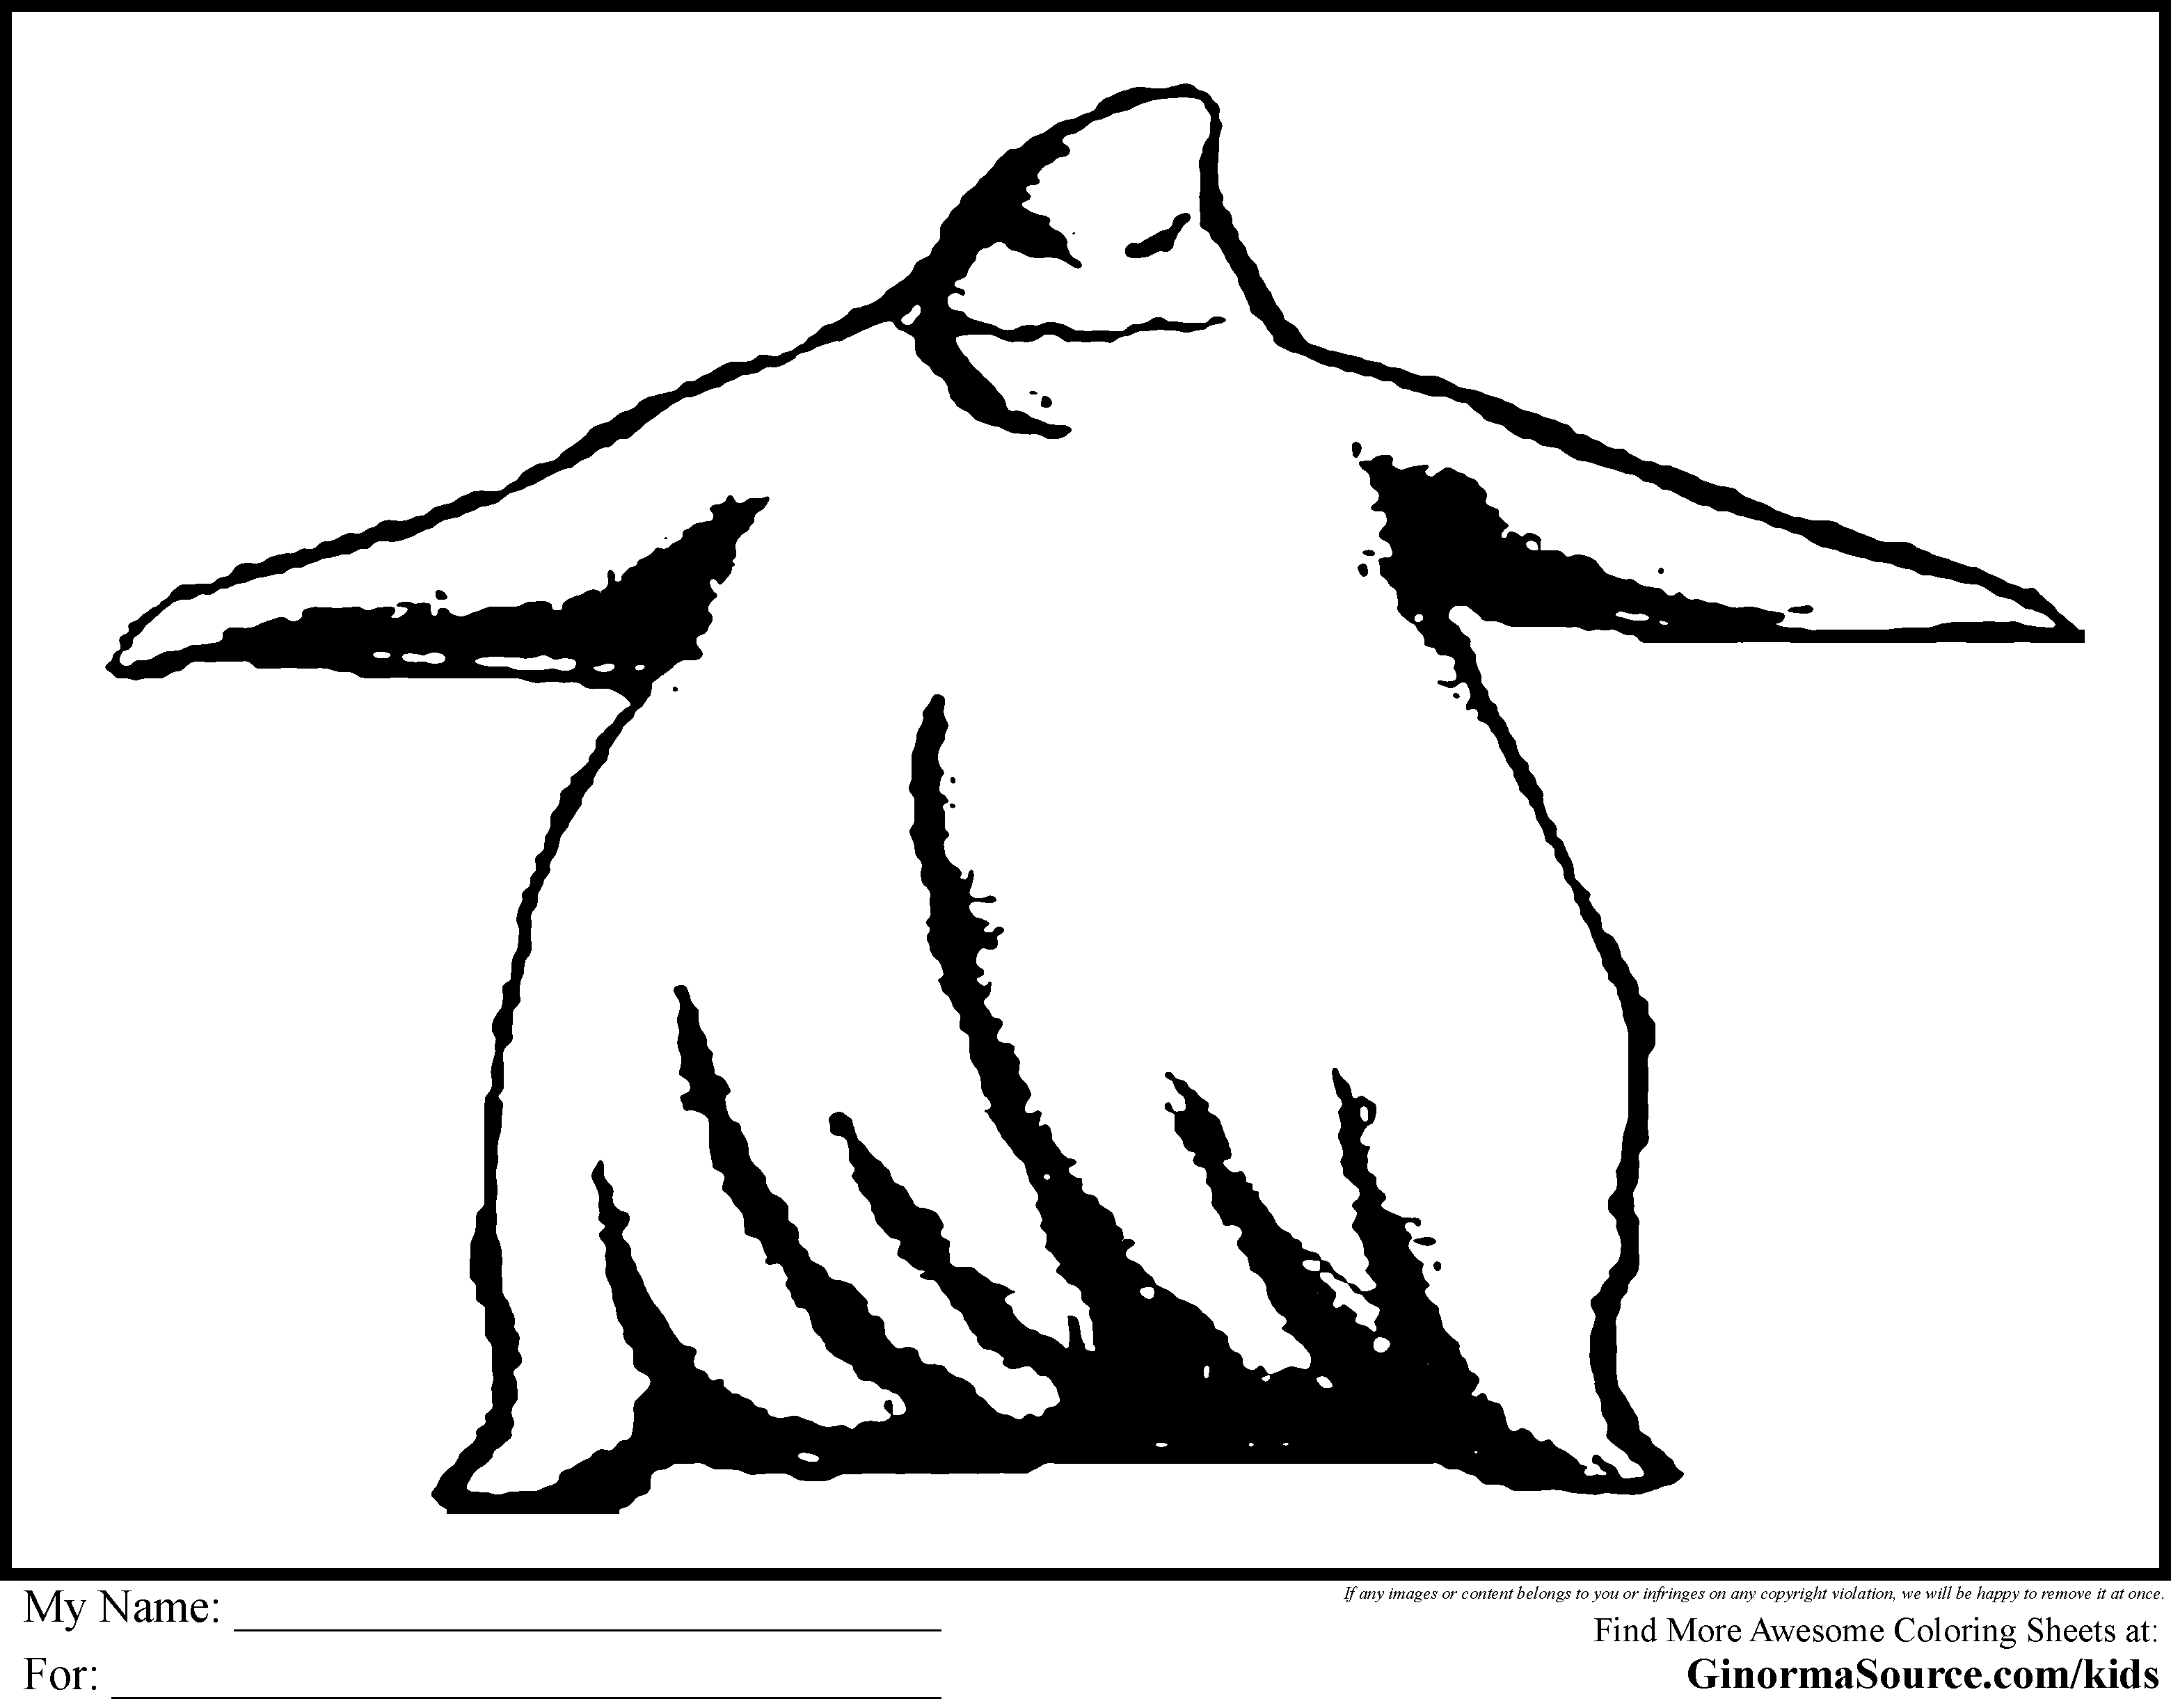 Nightmare Before Christmas Coloring Pages Oogie Boogie - The Nightmare Before Christmas - HD Wallpaper 